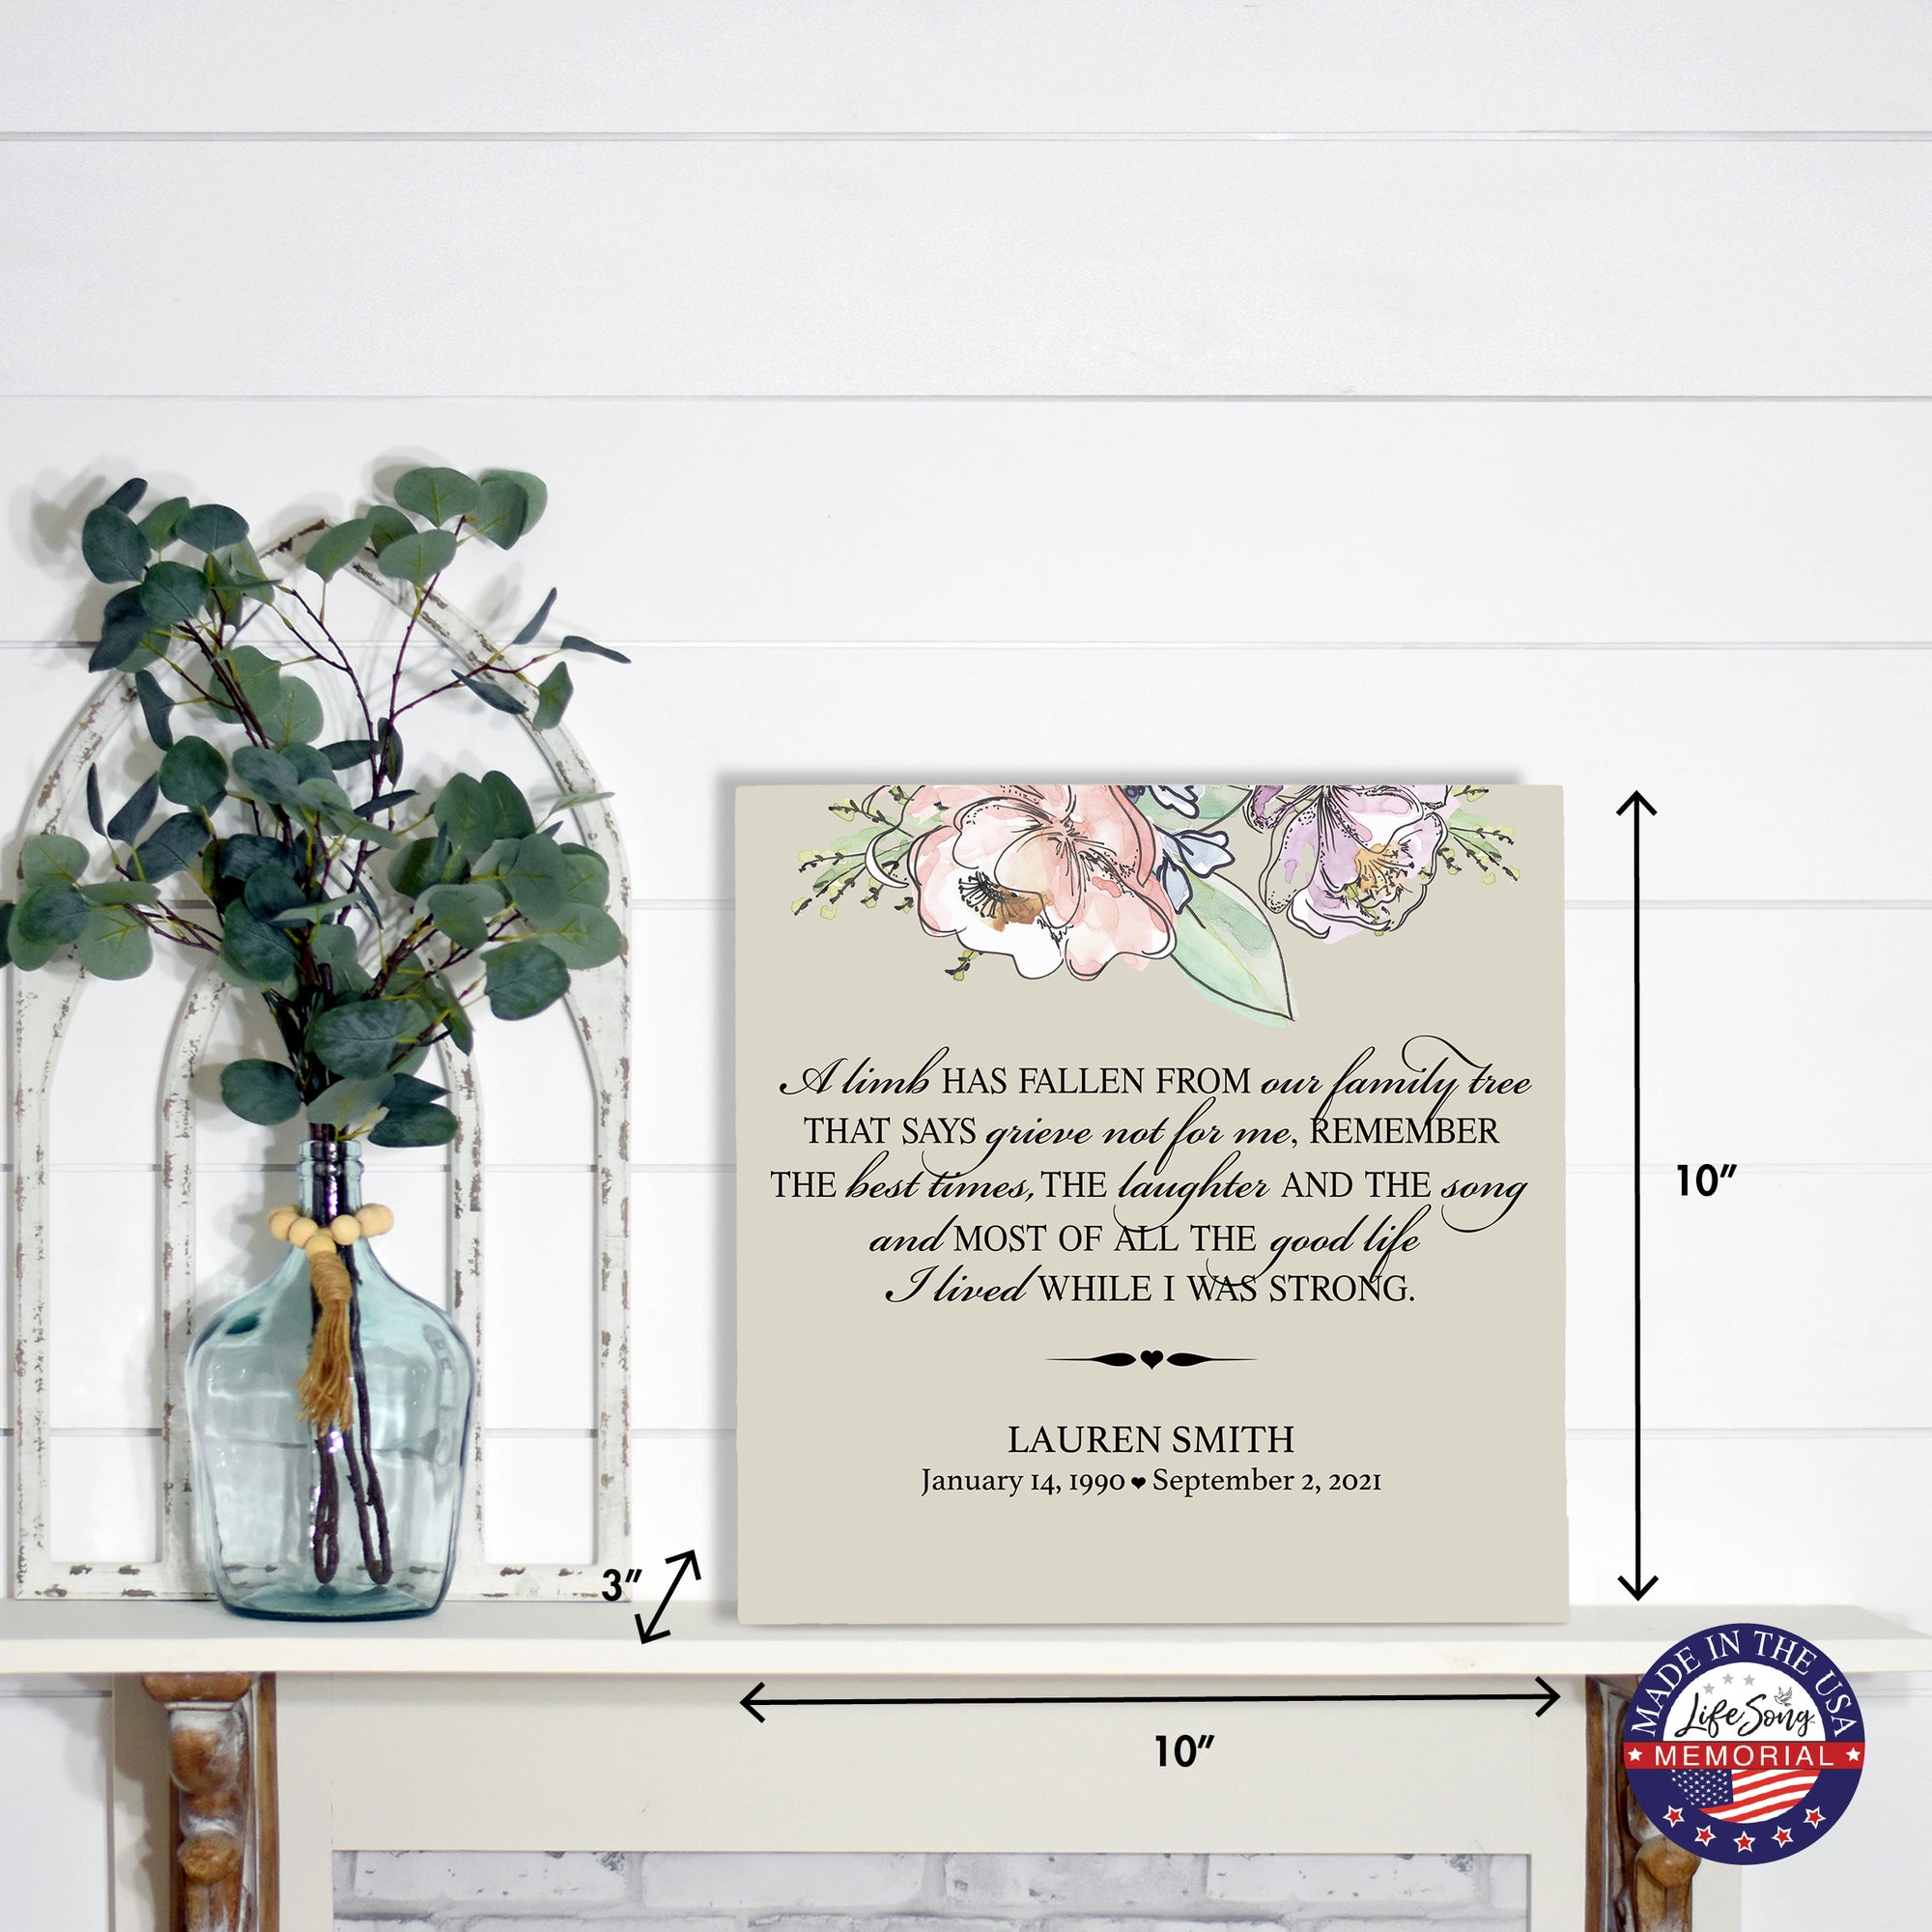 Timeless Human Memorial Shadow Box Urn With Inspirational Verse in Ivory - A Limb Has Fallen